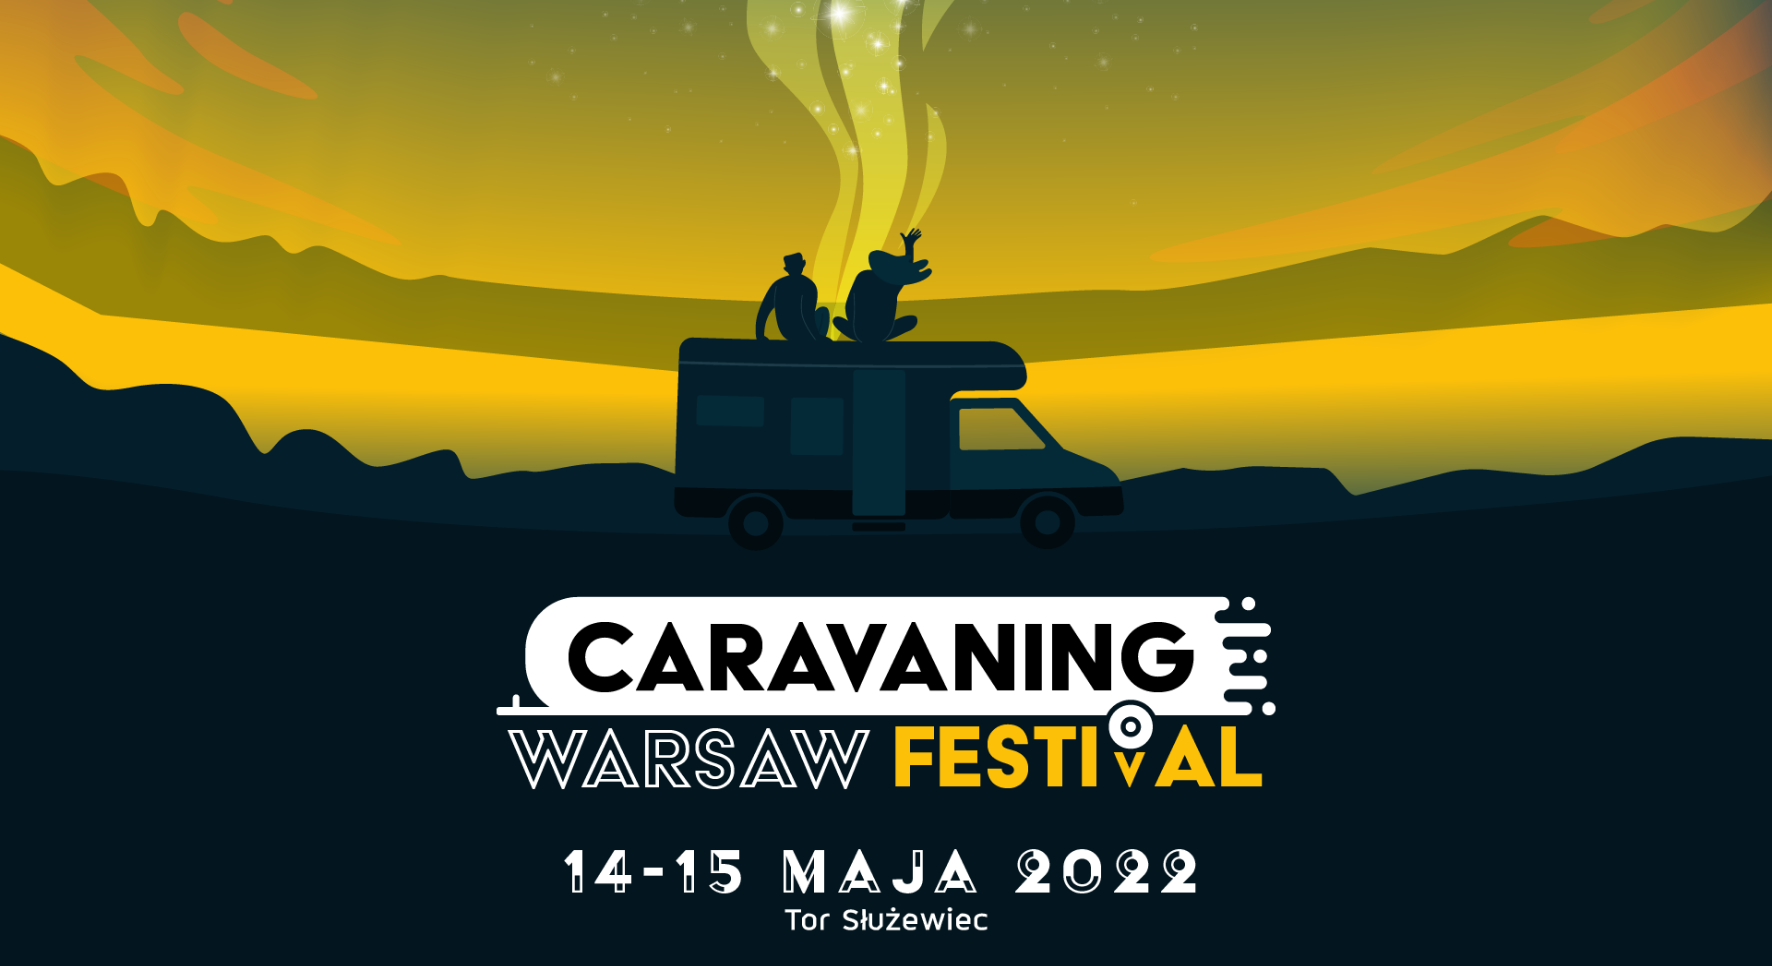 Caravaning Warsaw Festival - a new format of a caravanning event in Warsaw in May! – main image